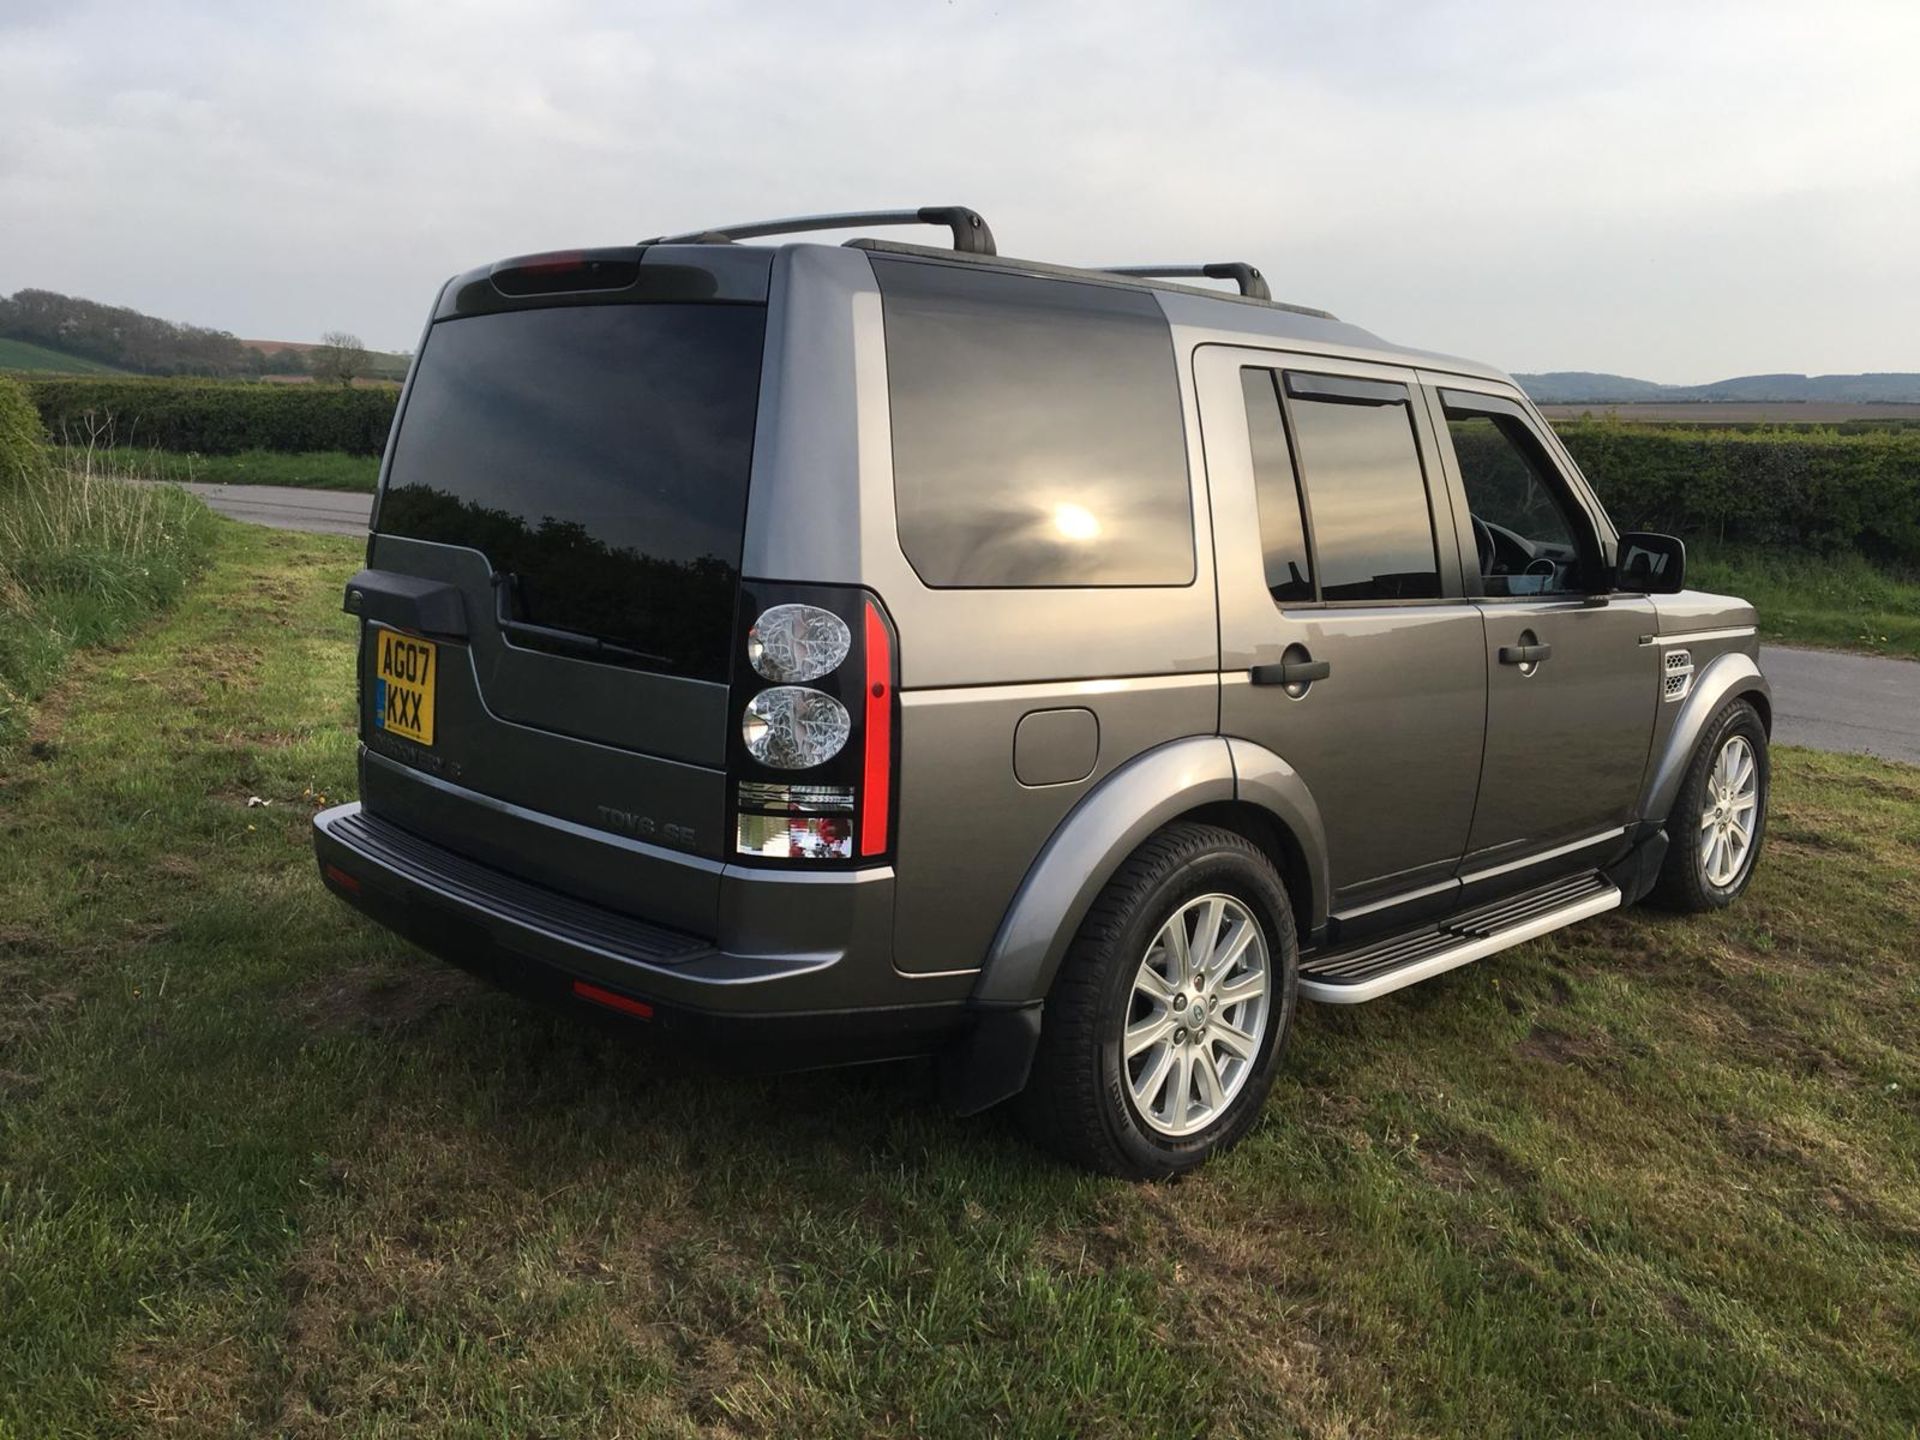 2007/07 REG LAND ROVER DISCOVERY 3 TDV6 SE AUTOMATIC 2.7 DIESEL 4X4, 7 SEATS, FACE-LIFT *NO VAT* - Image 8 of 16